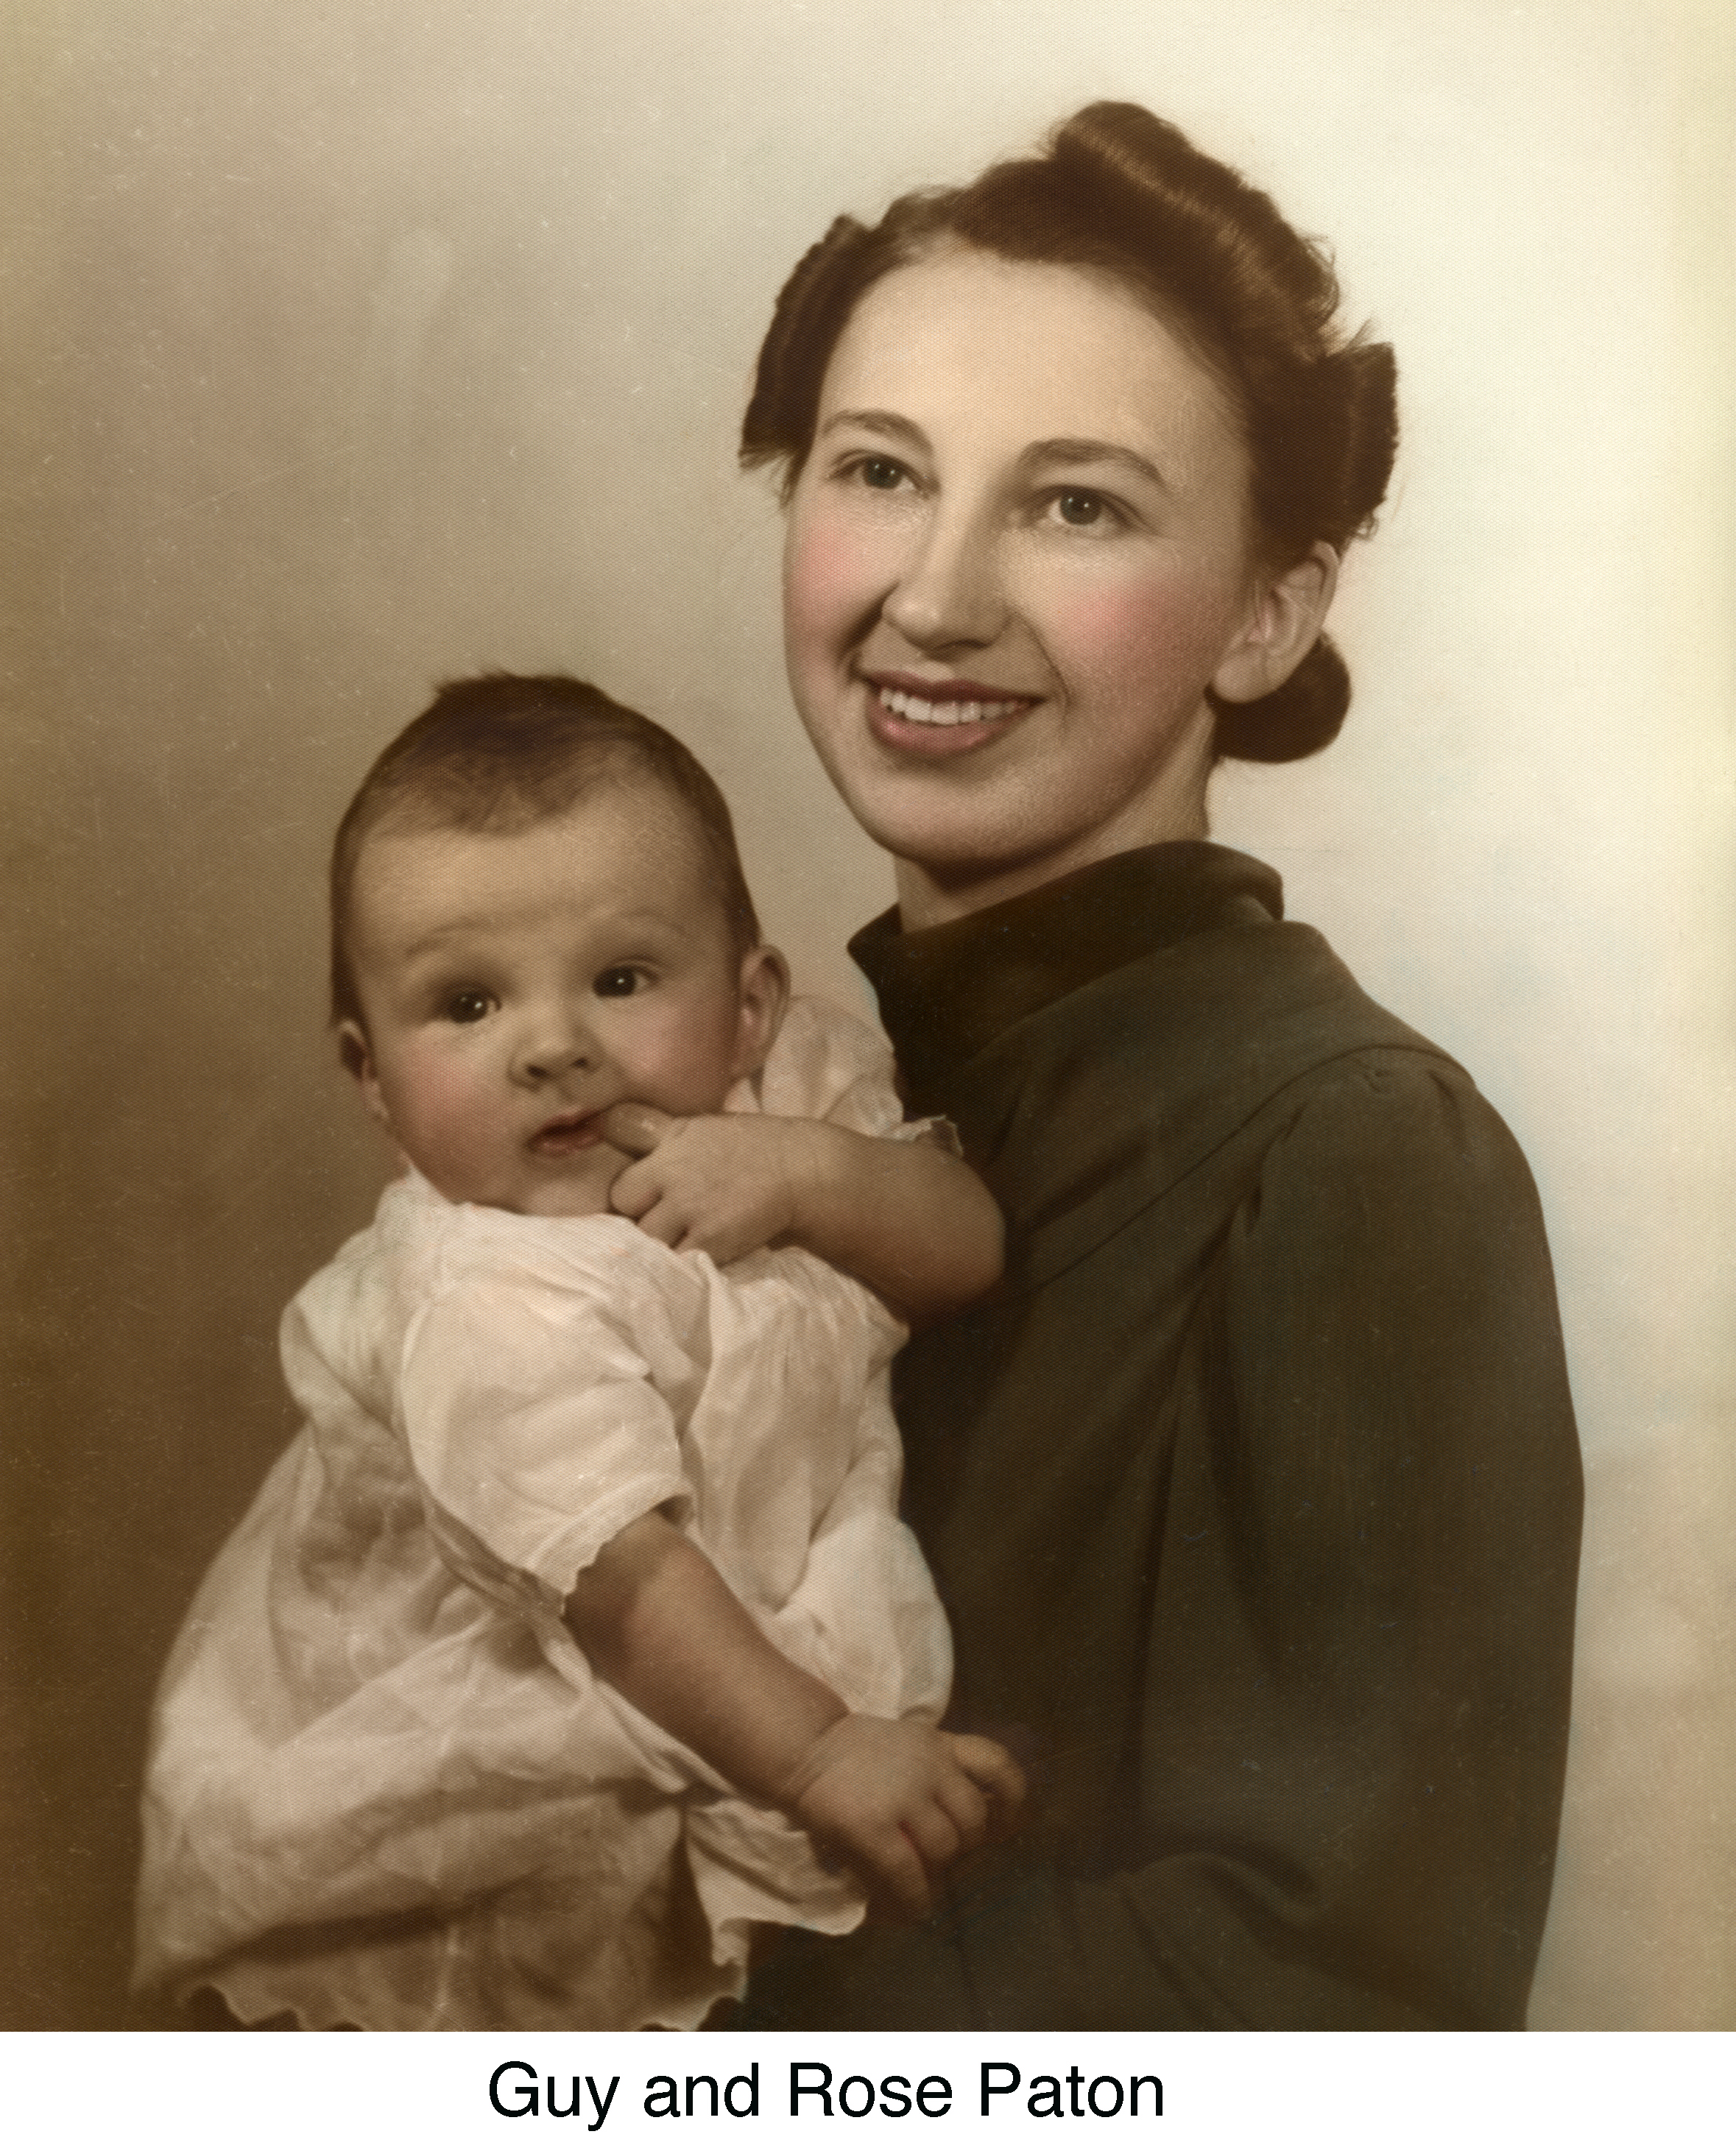 studio photo of Rose Paton with her son Guy